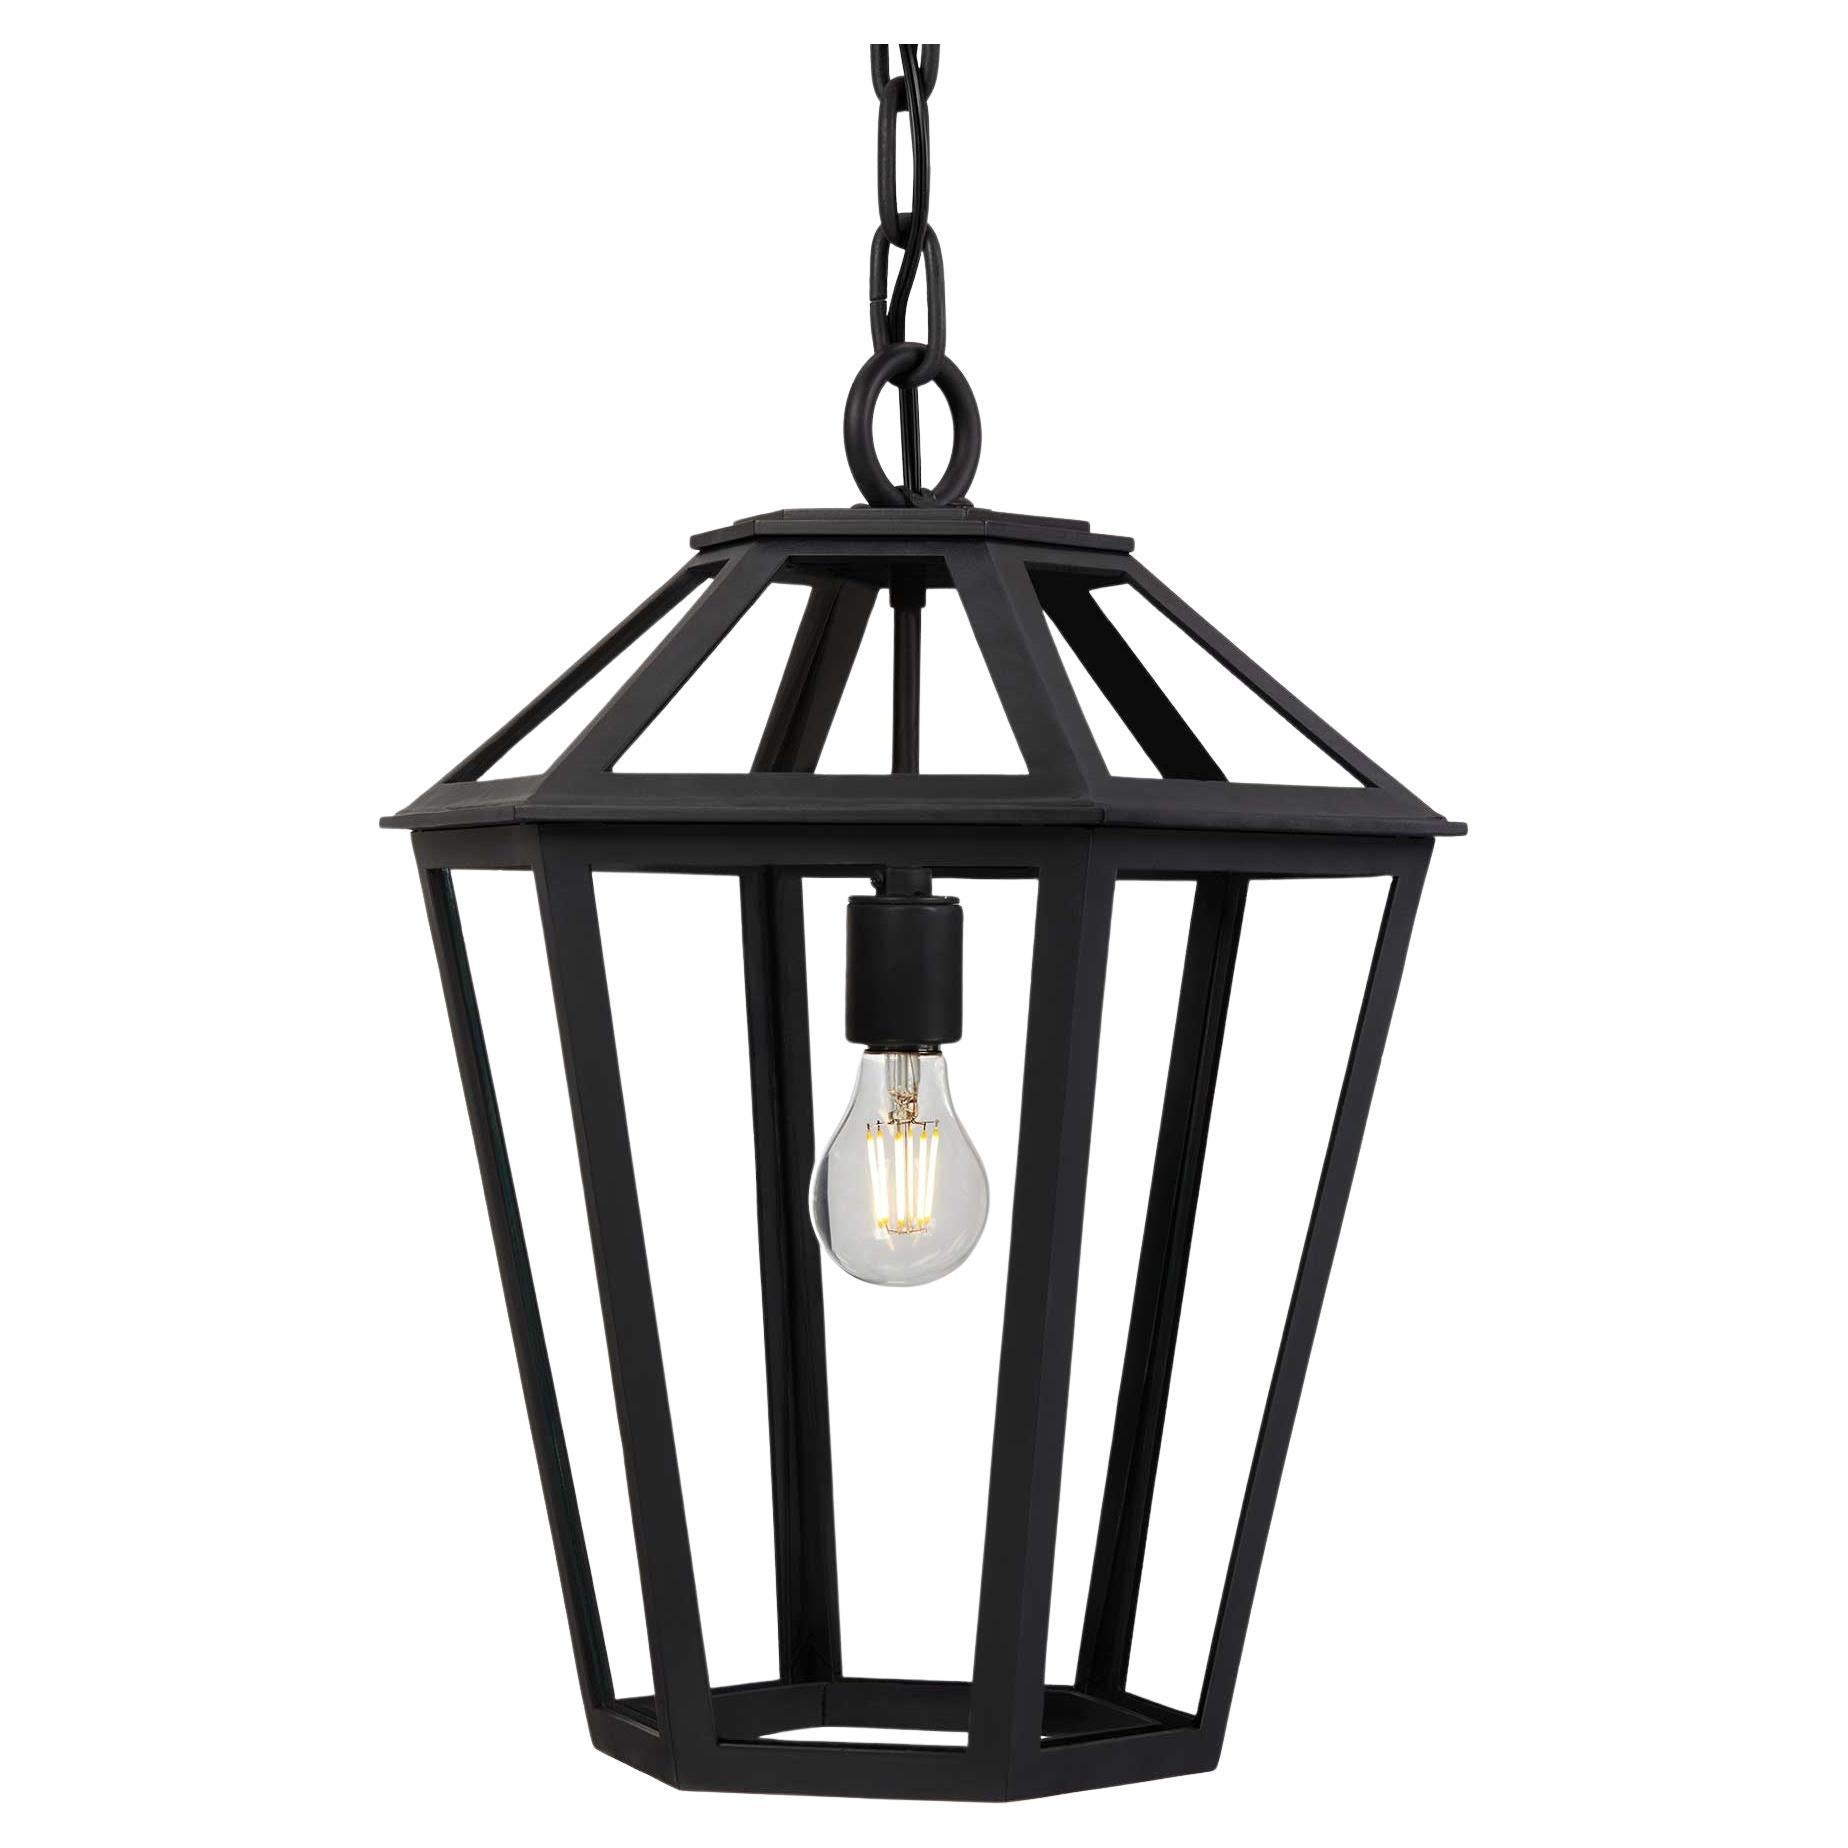 This Heirloom Quality, Hand-Crafted Lantern designed by Architect Anthony Grumbine features a classic tapered form with six glass panels on the top and the bottom, creating dynamic silhouettes from every angle. This large hexagonal fixture is